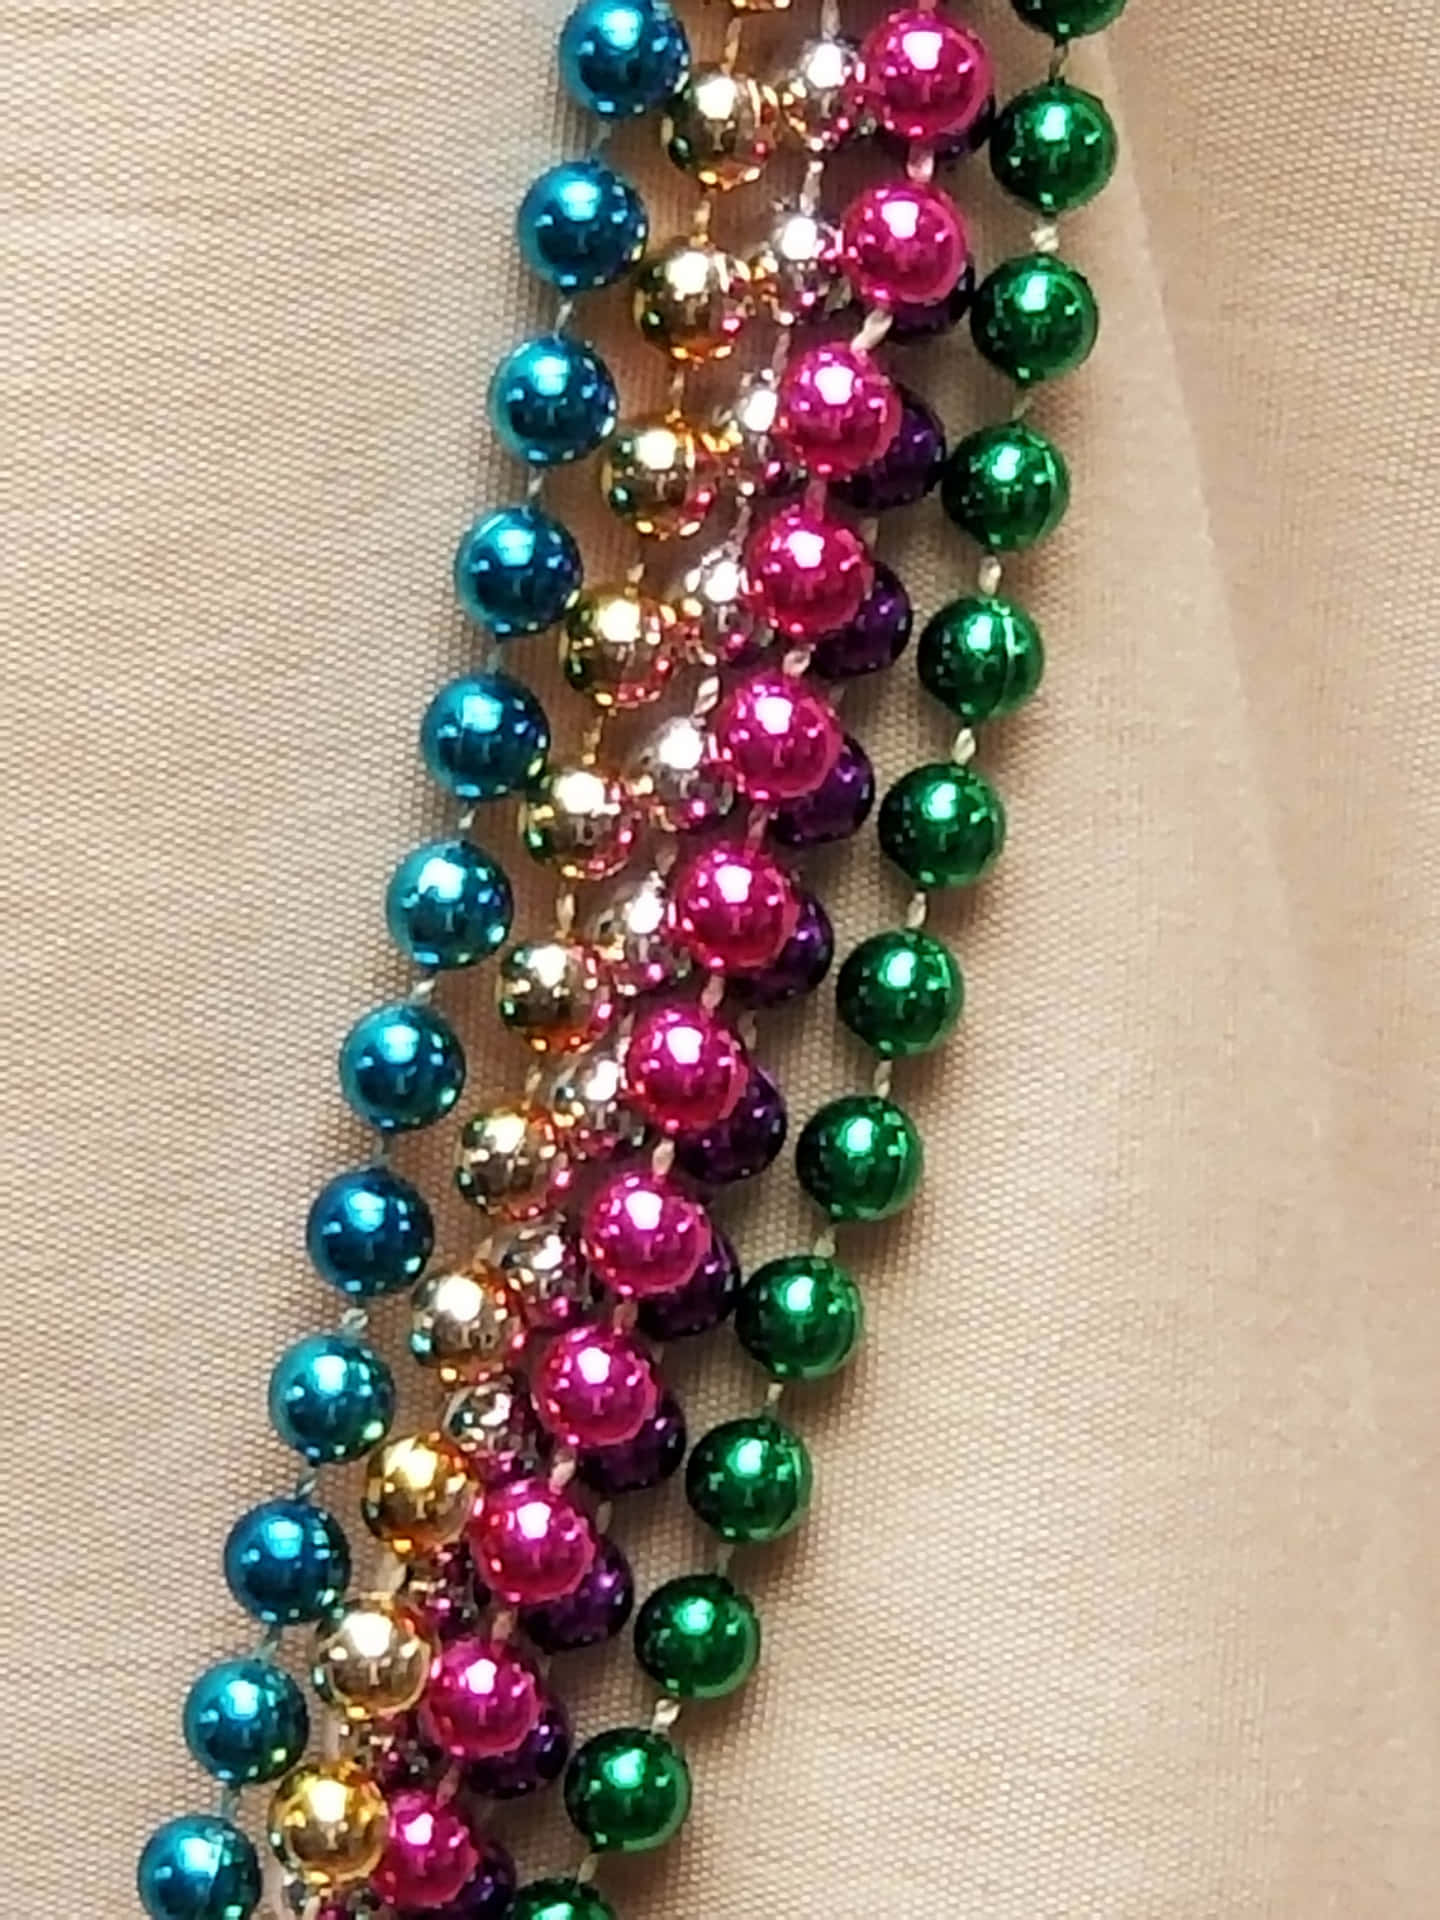 A Colorful Beaded Necklace With Beads On It